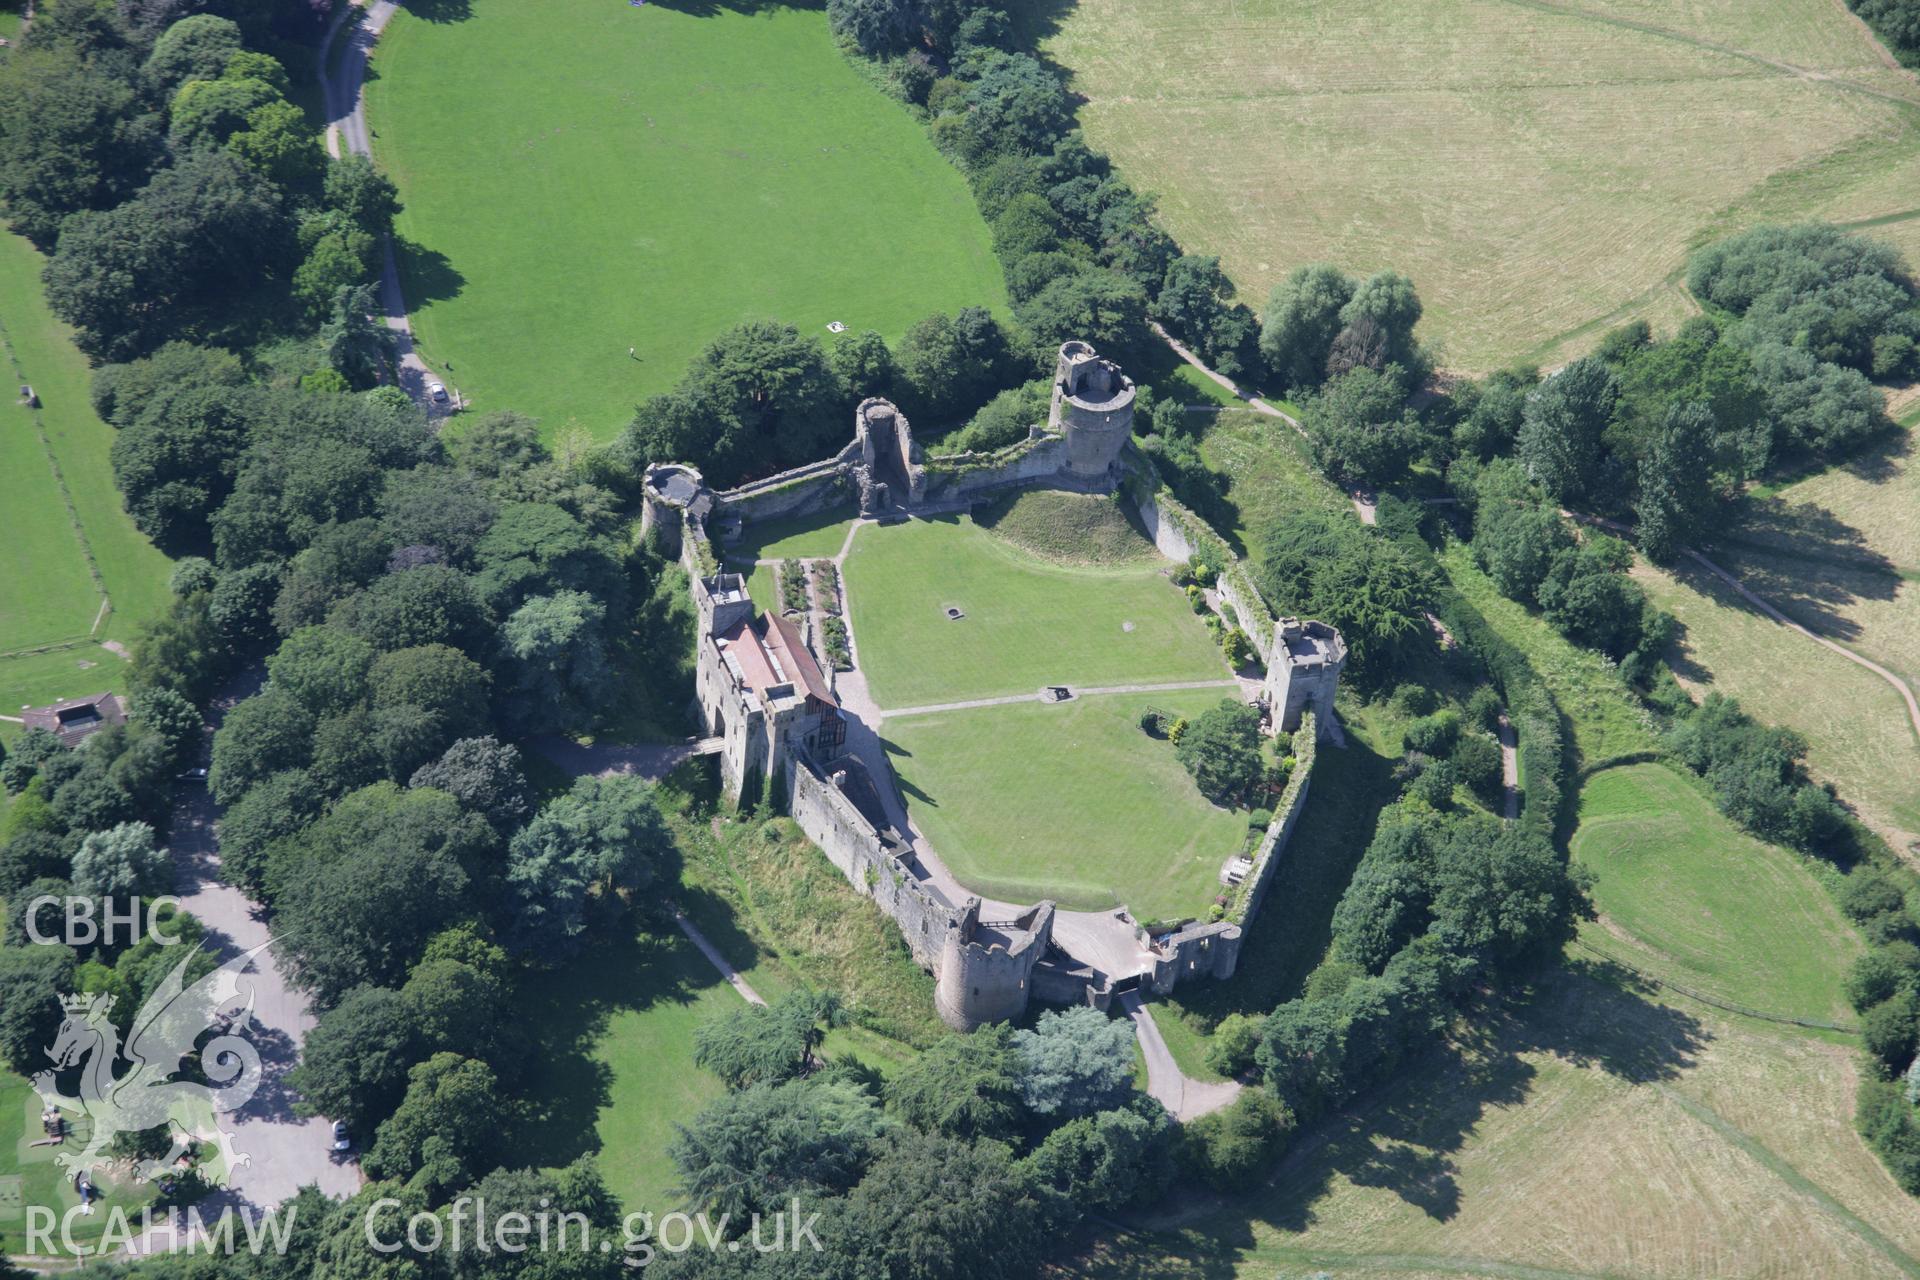 RCAHMW colour oblique aerial photograph of Caldicot Castle. Taken on 13 July 2006 by Toby Driver.